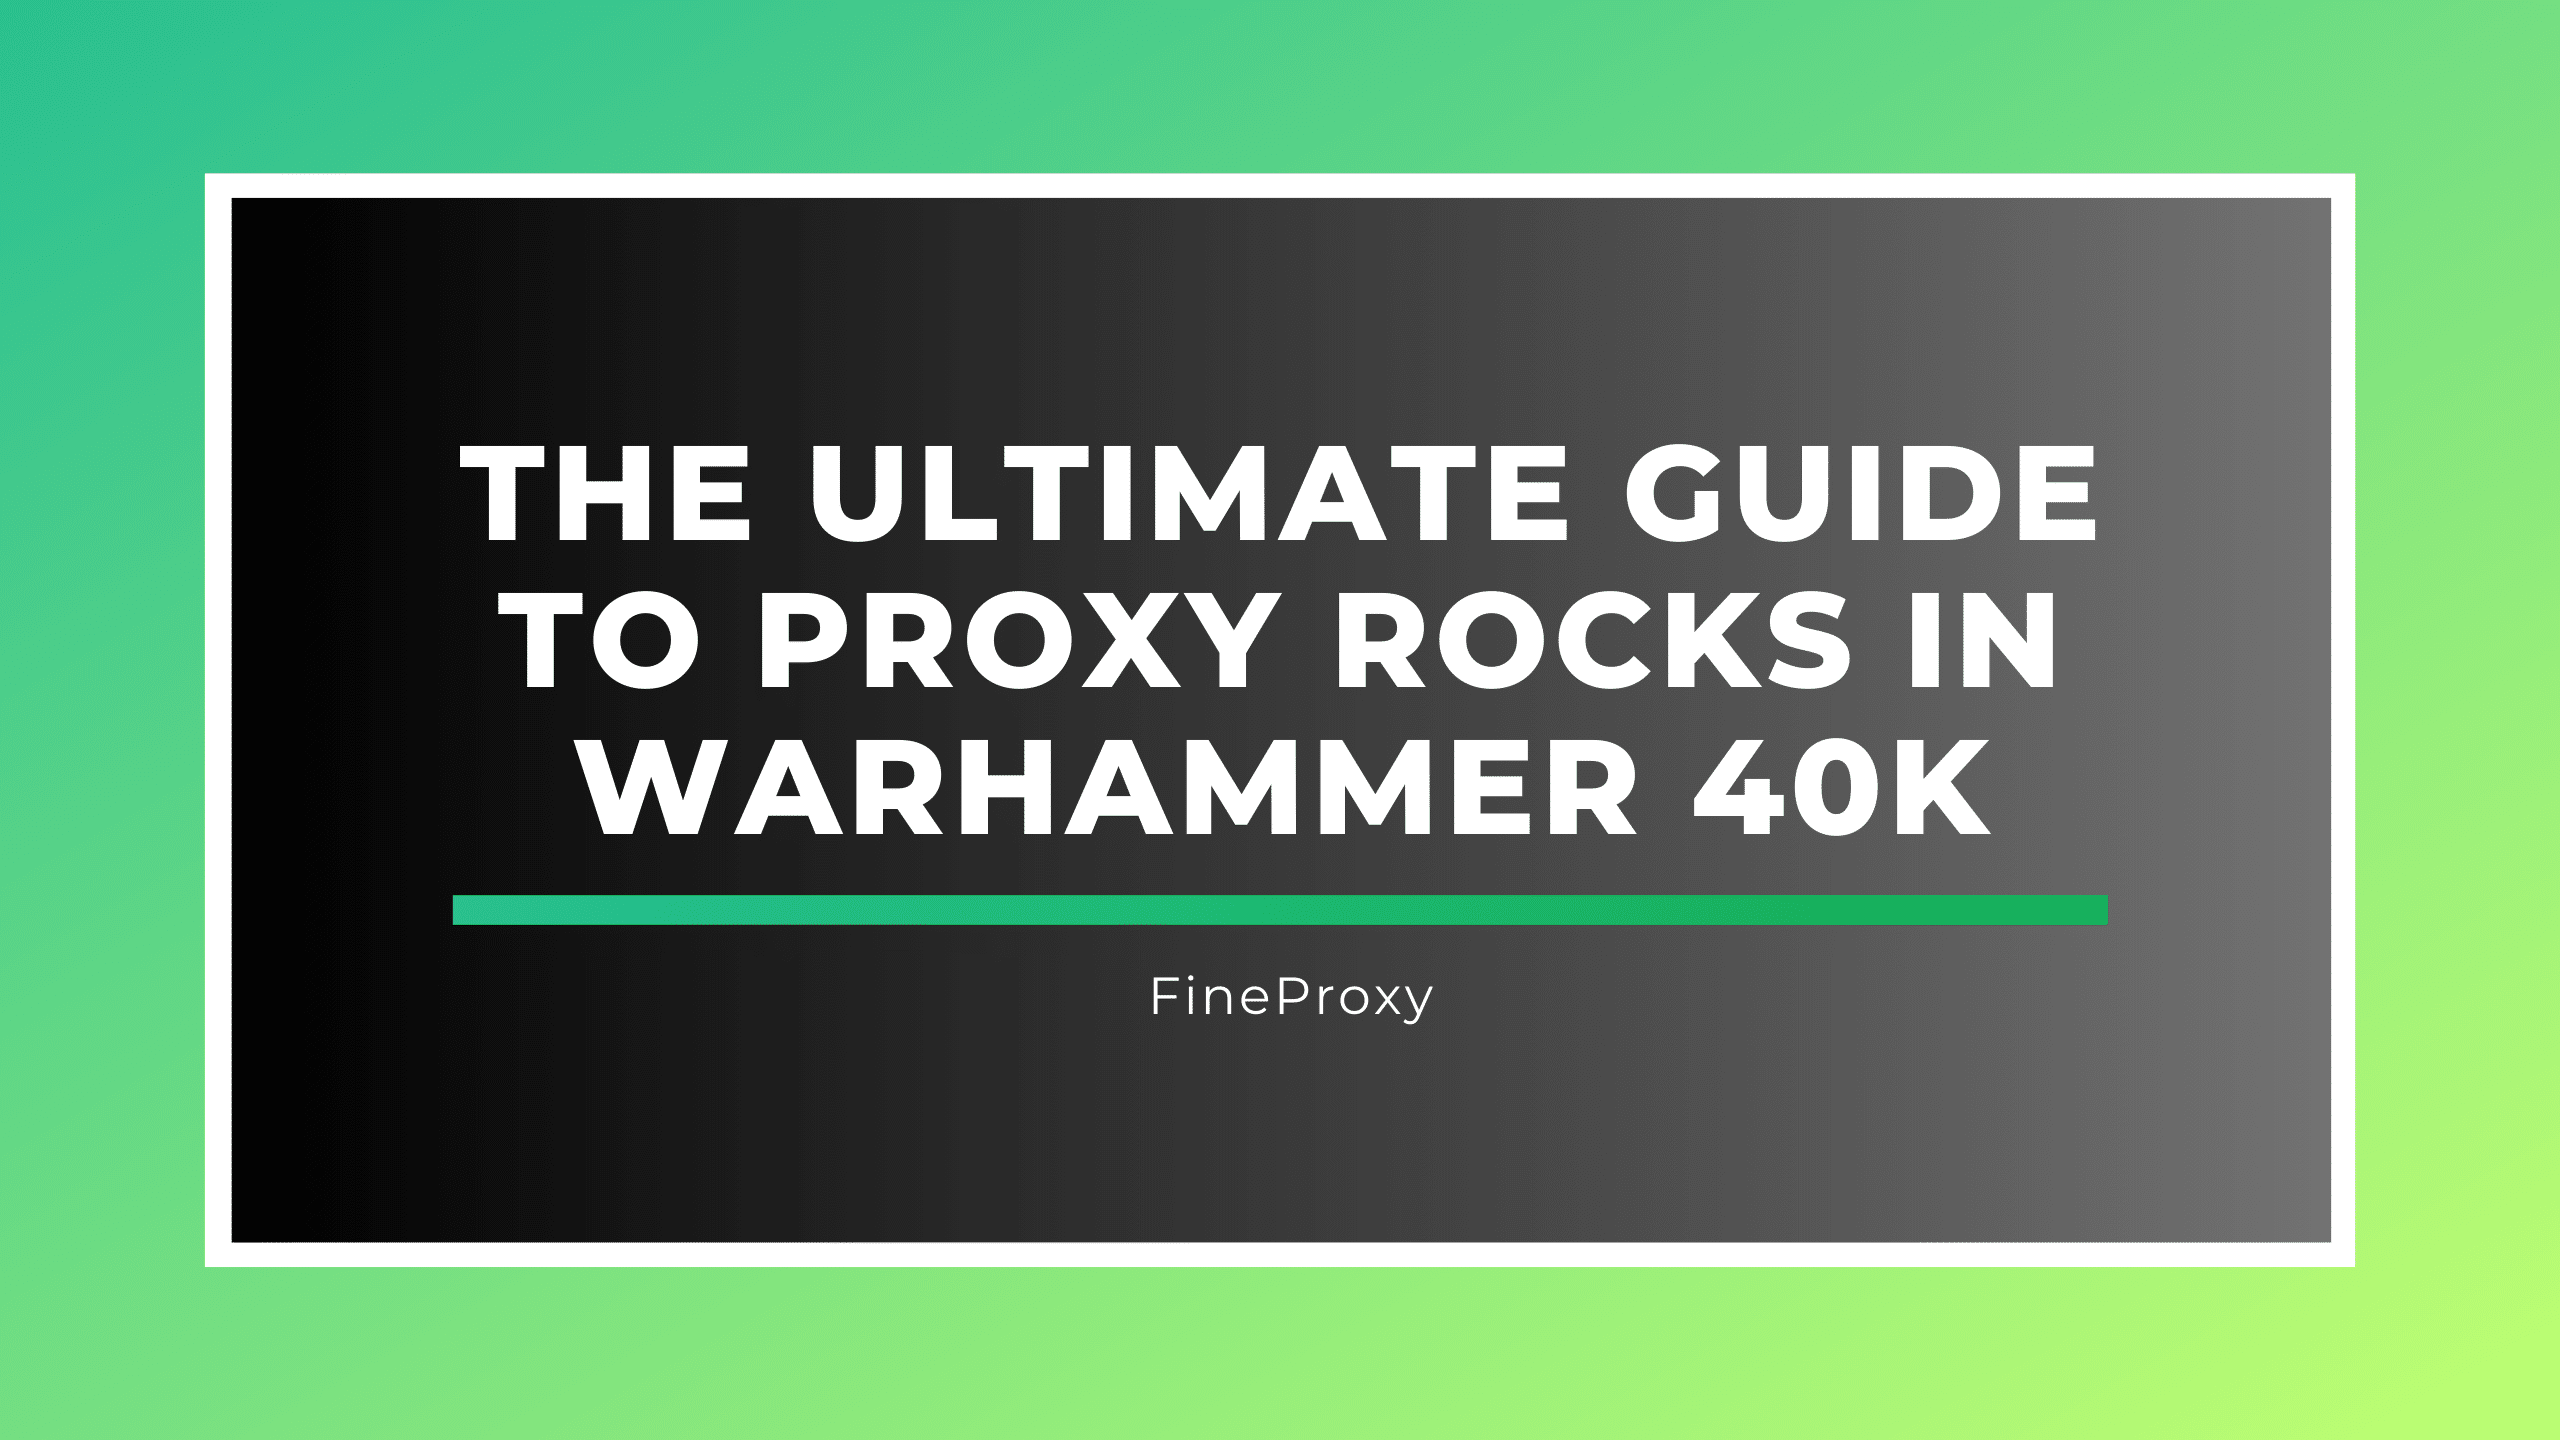 The Ultimate Guide to Proxy Rocks ve Warhammer 40k